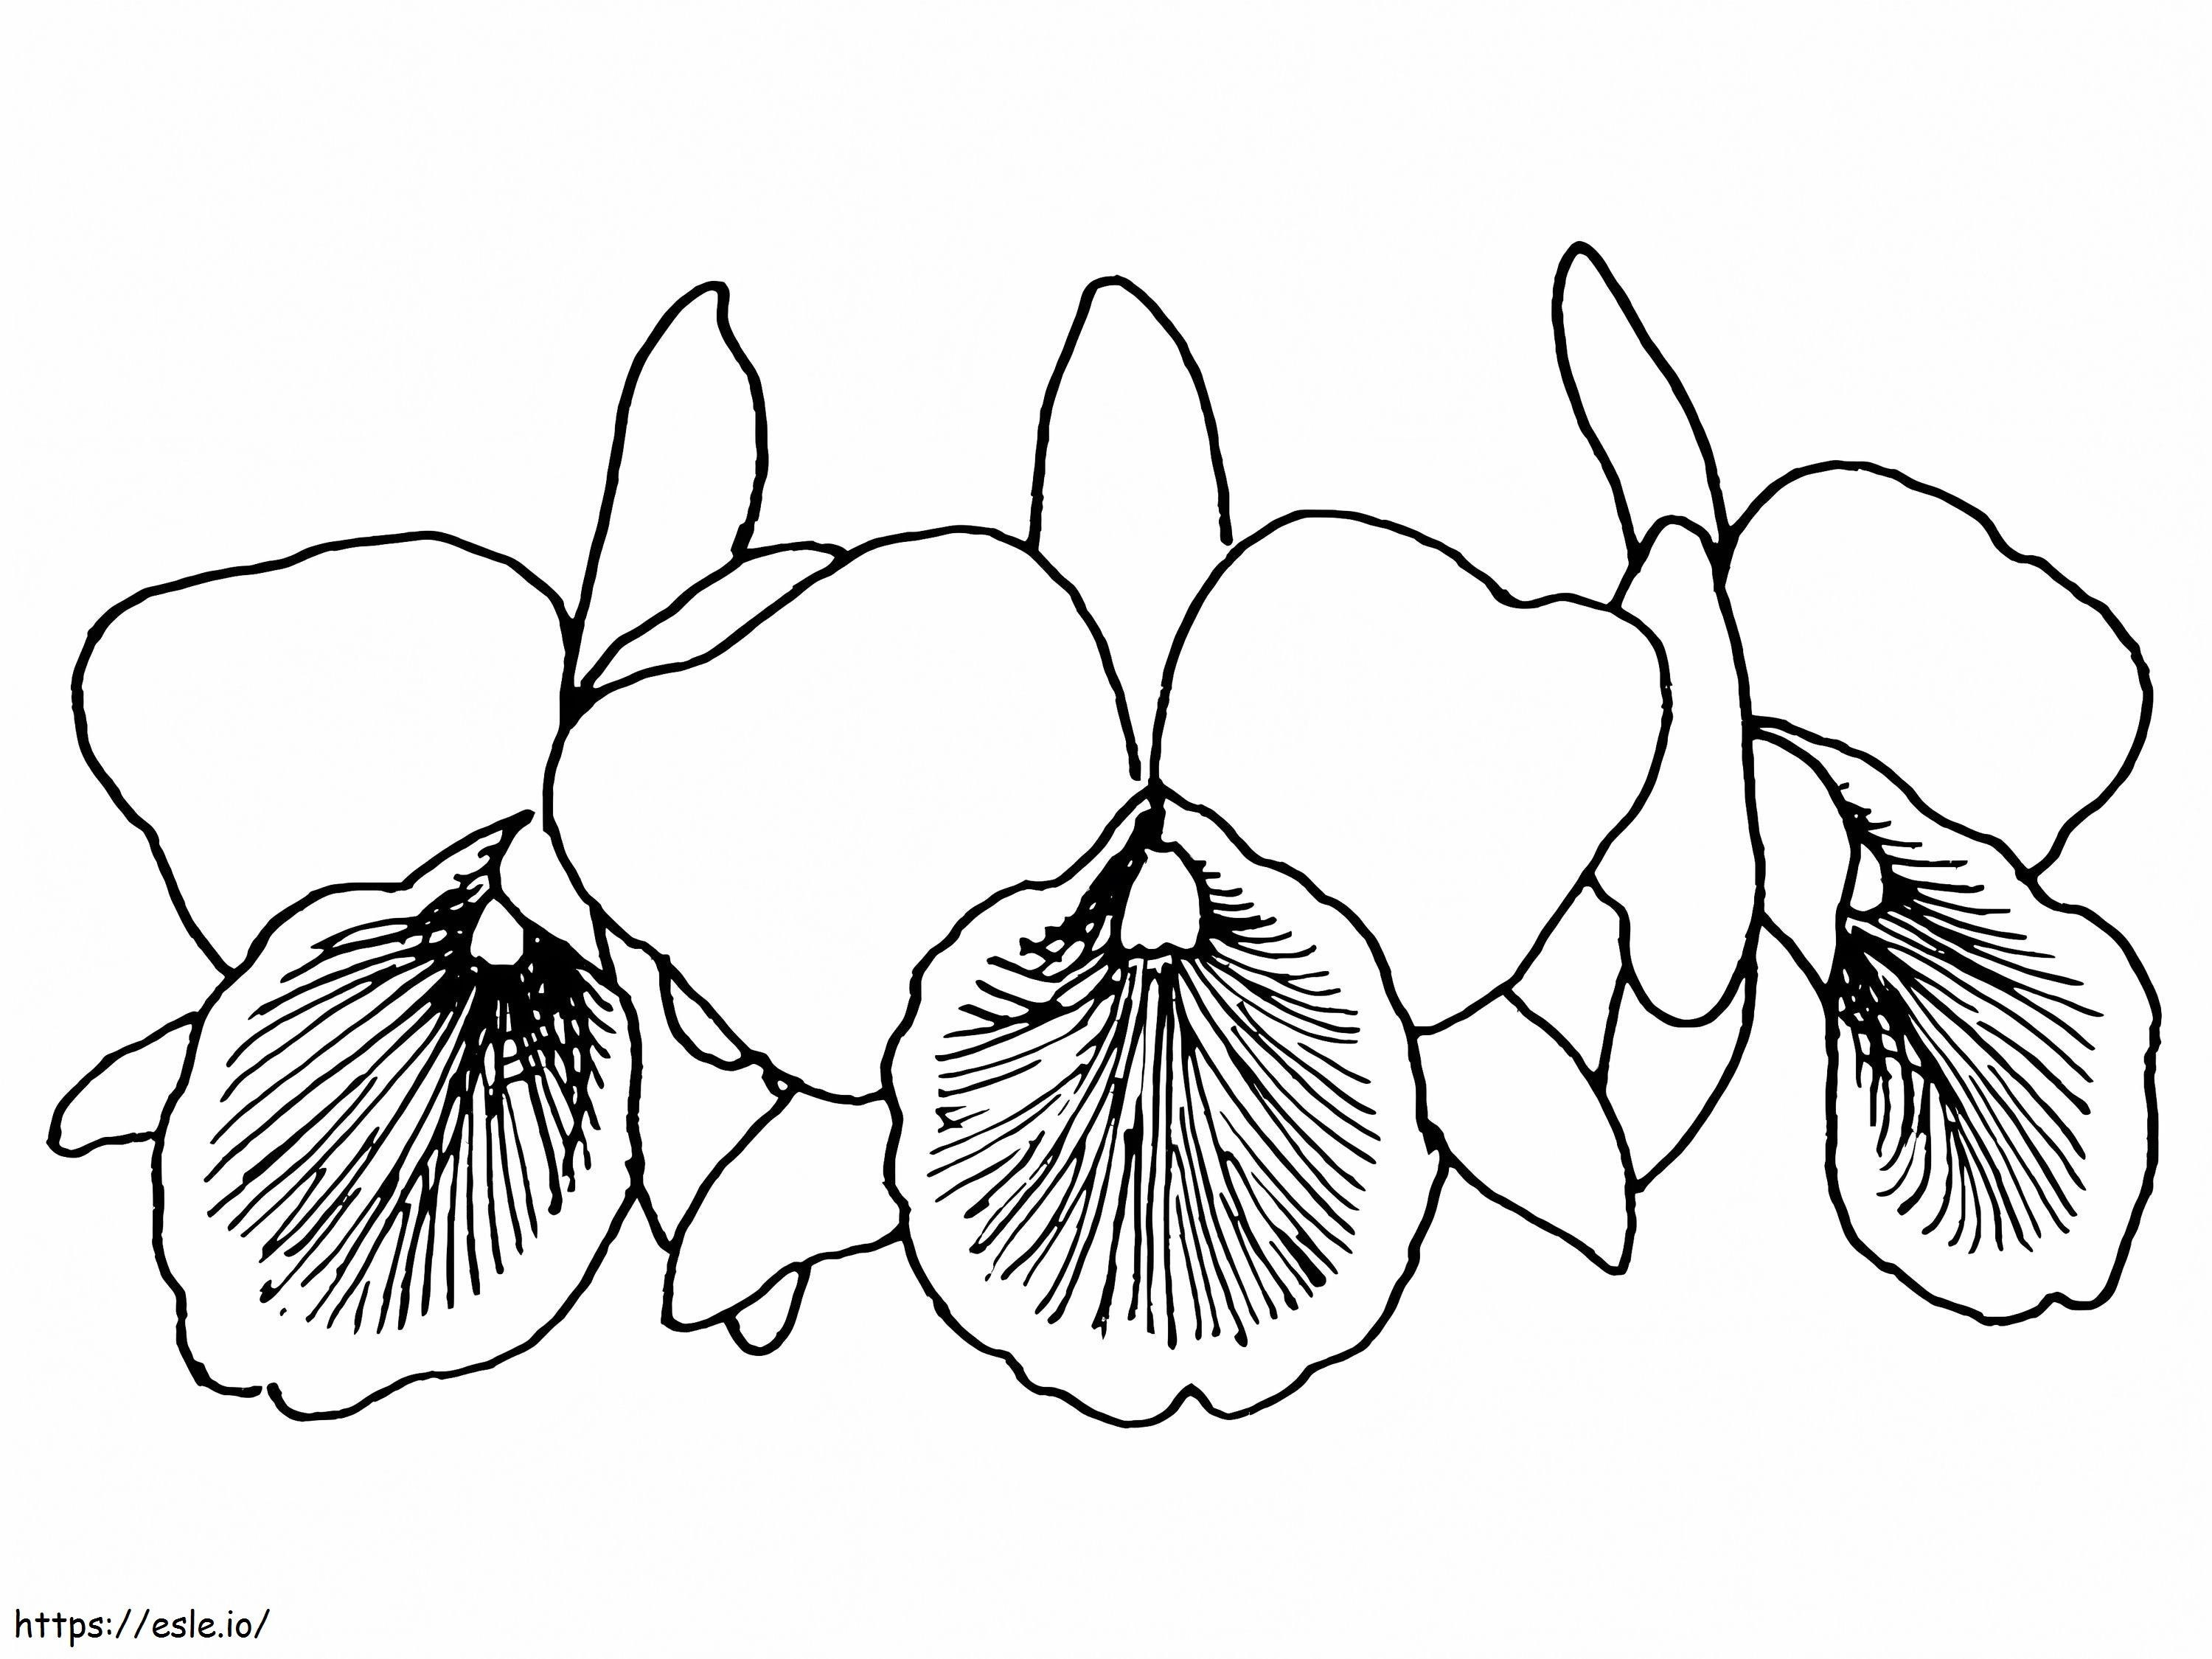 Three Orchids coloring page